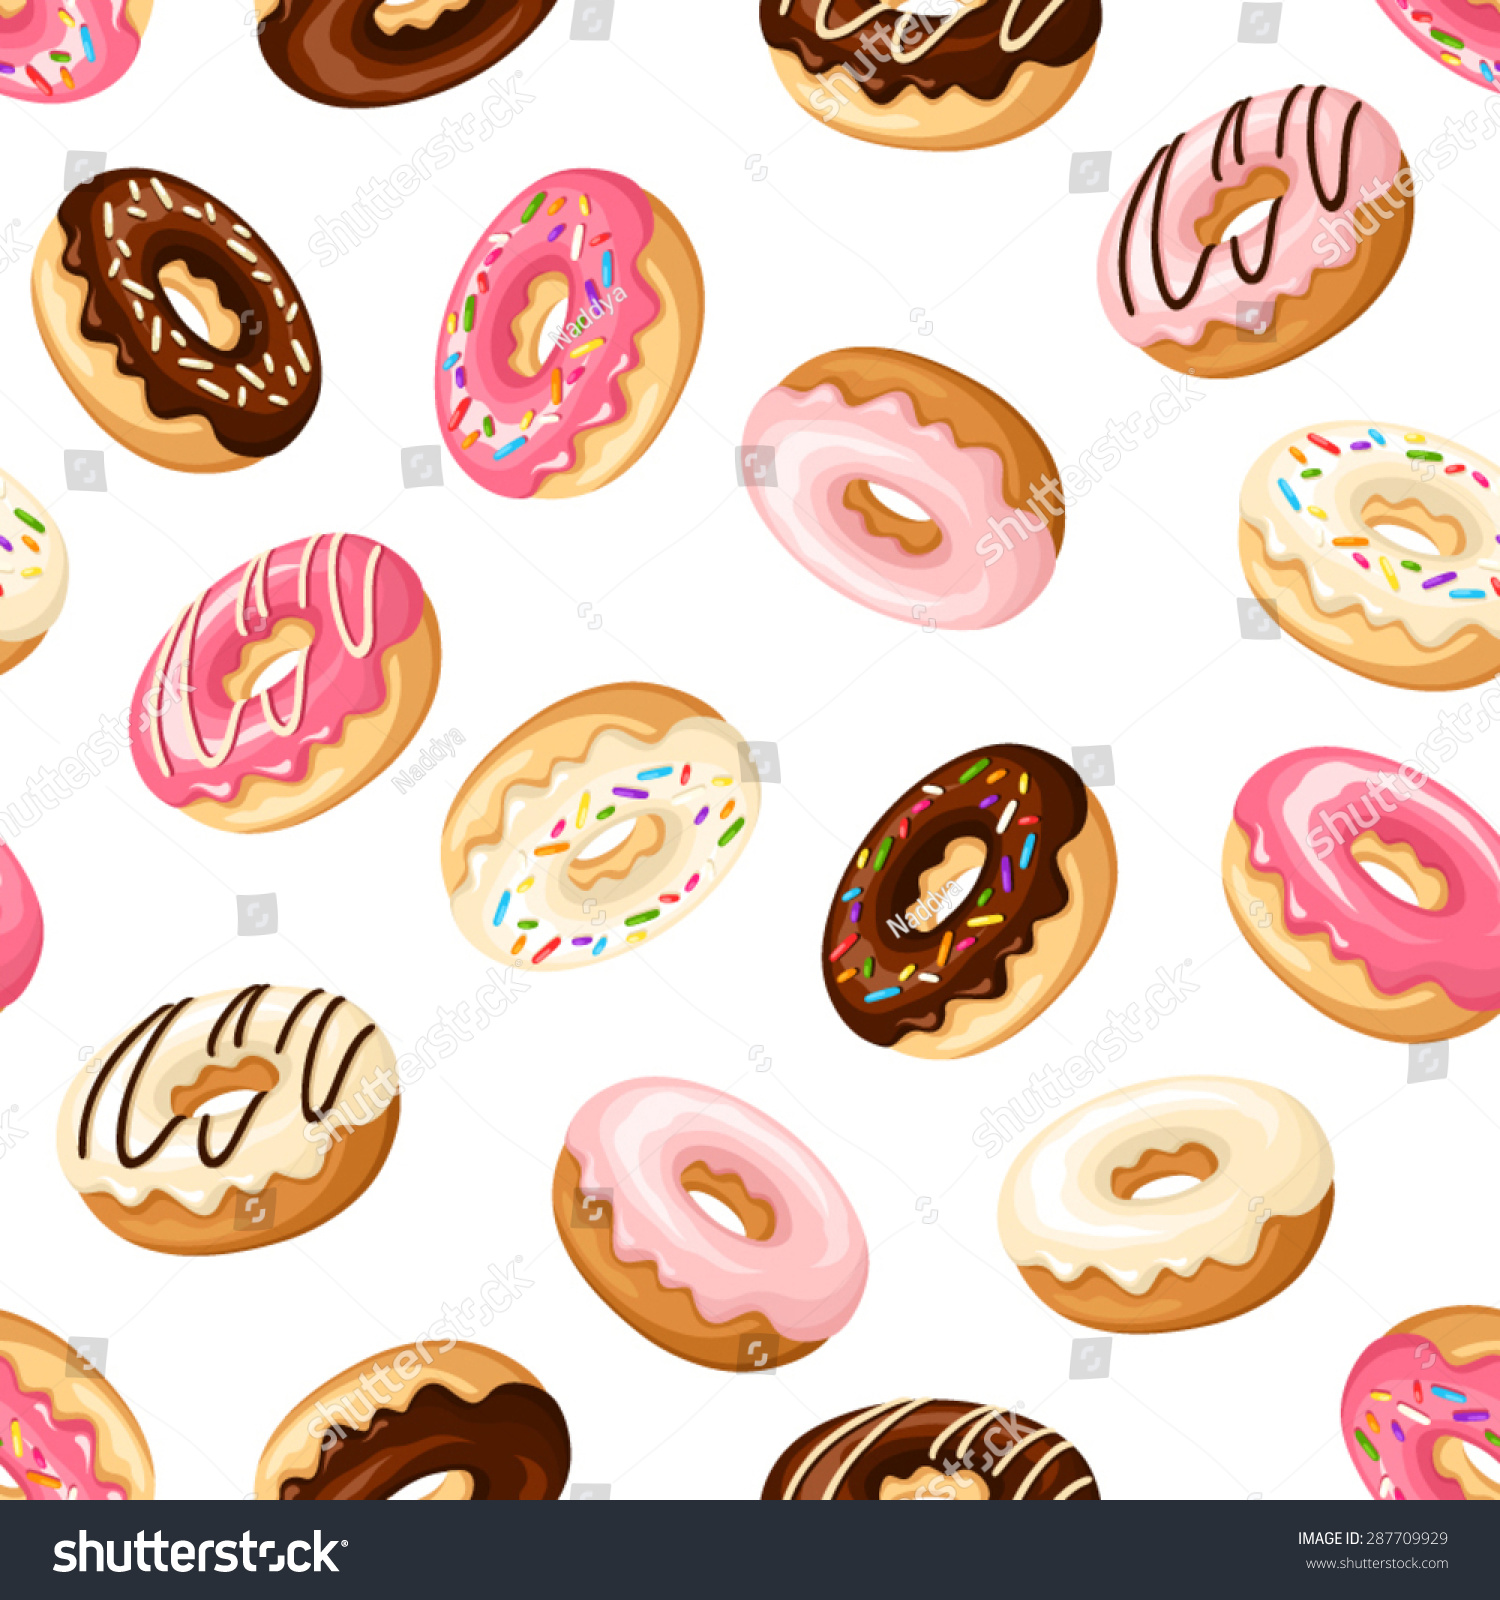 Vector Seamless Pattern With Colorful Donuts With Glaze And Sprinkles On A White Background 8226